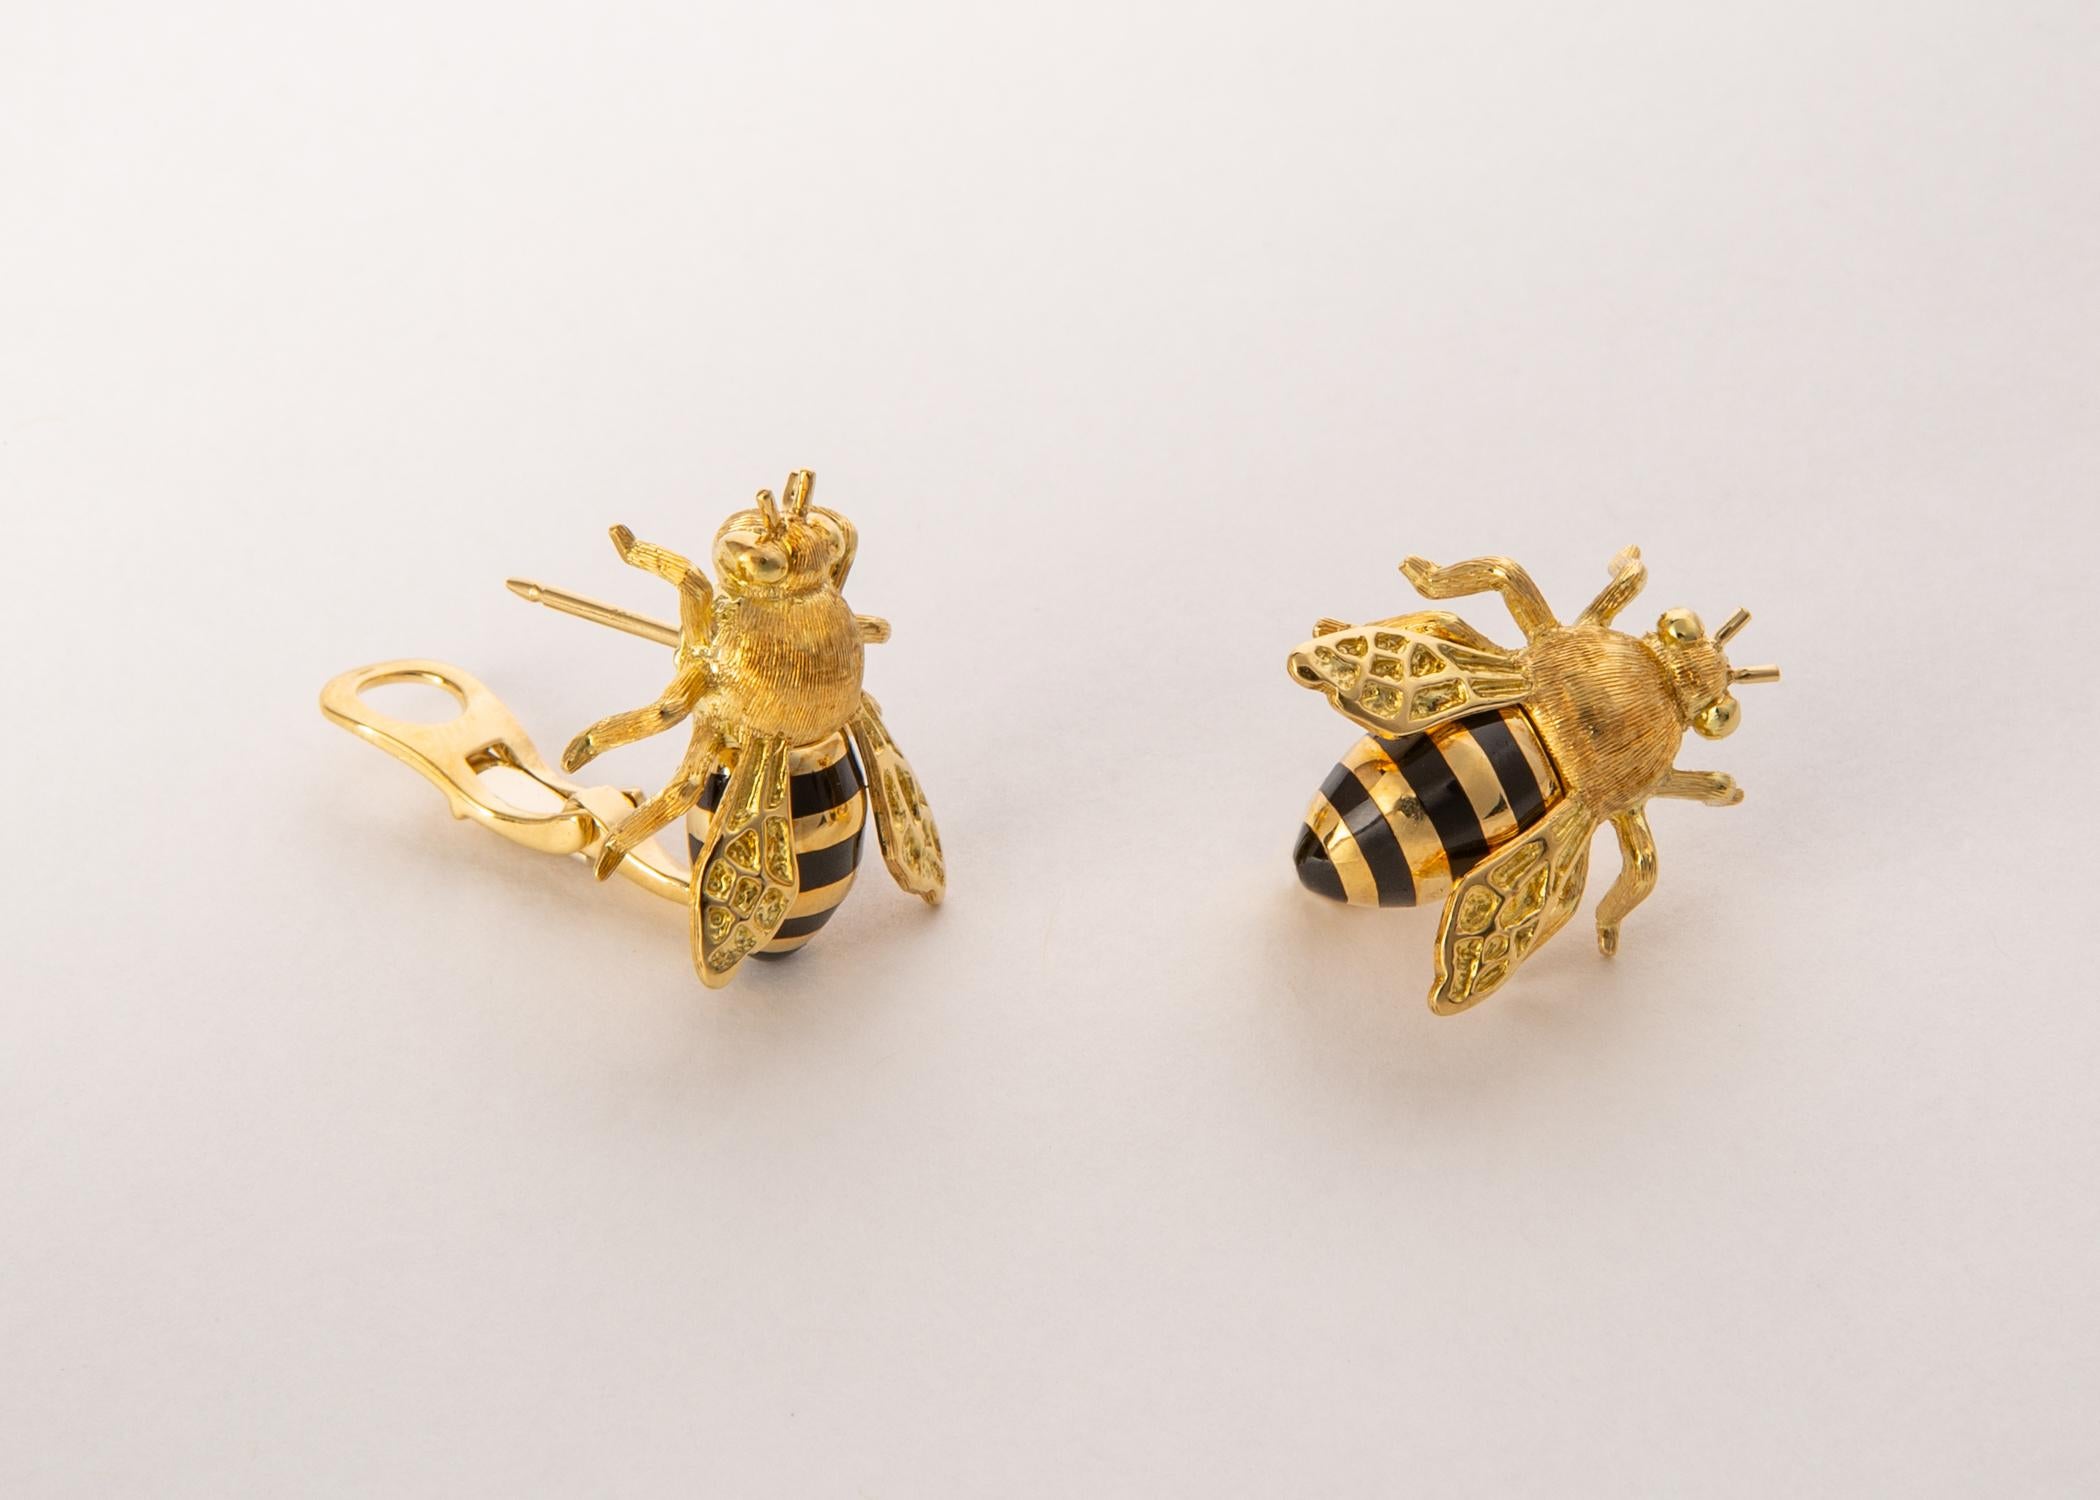 Verdura creates this whimsical pair of honeybee earrings based on an archival design from 1943. Just over 3/4's of an inch in length.